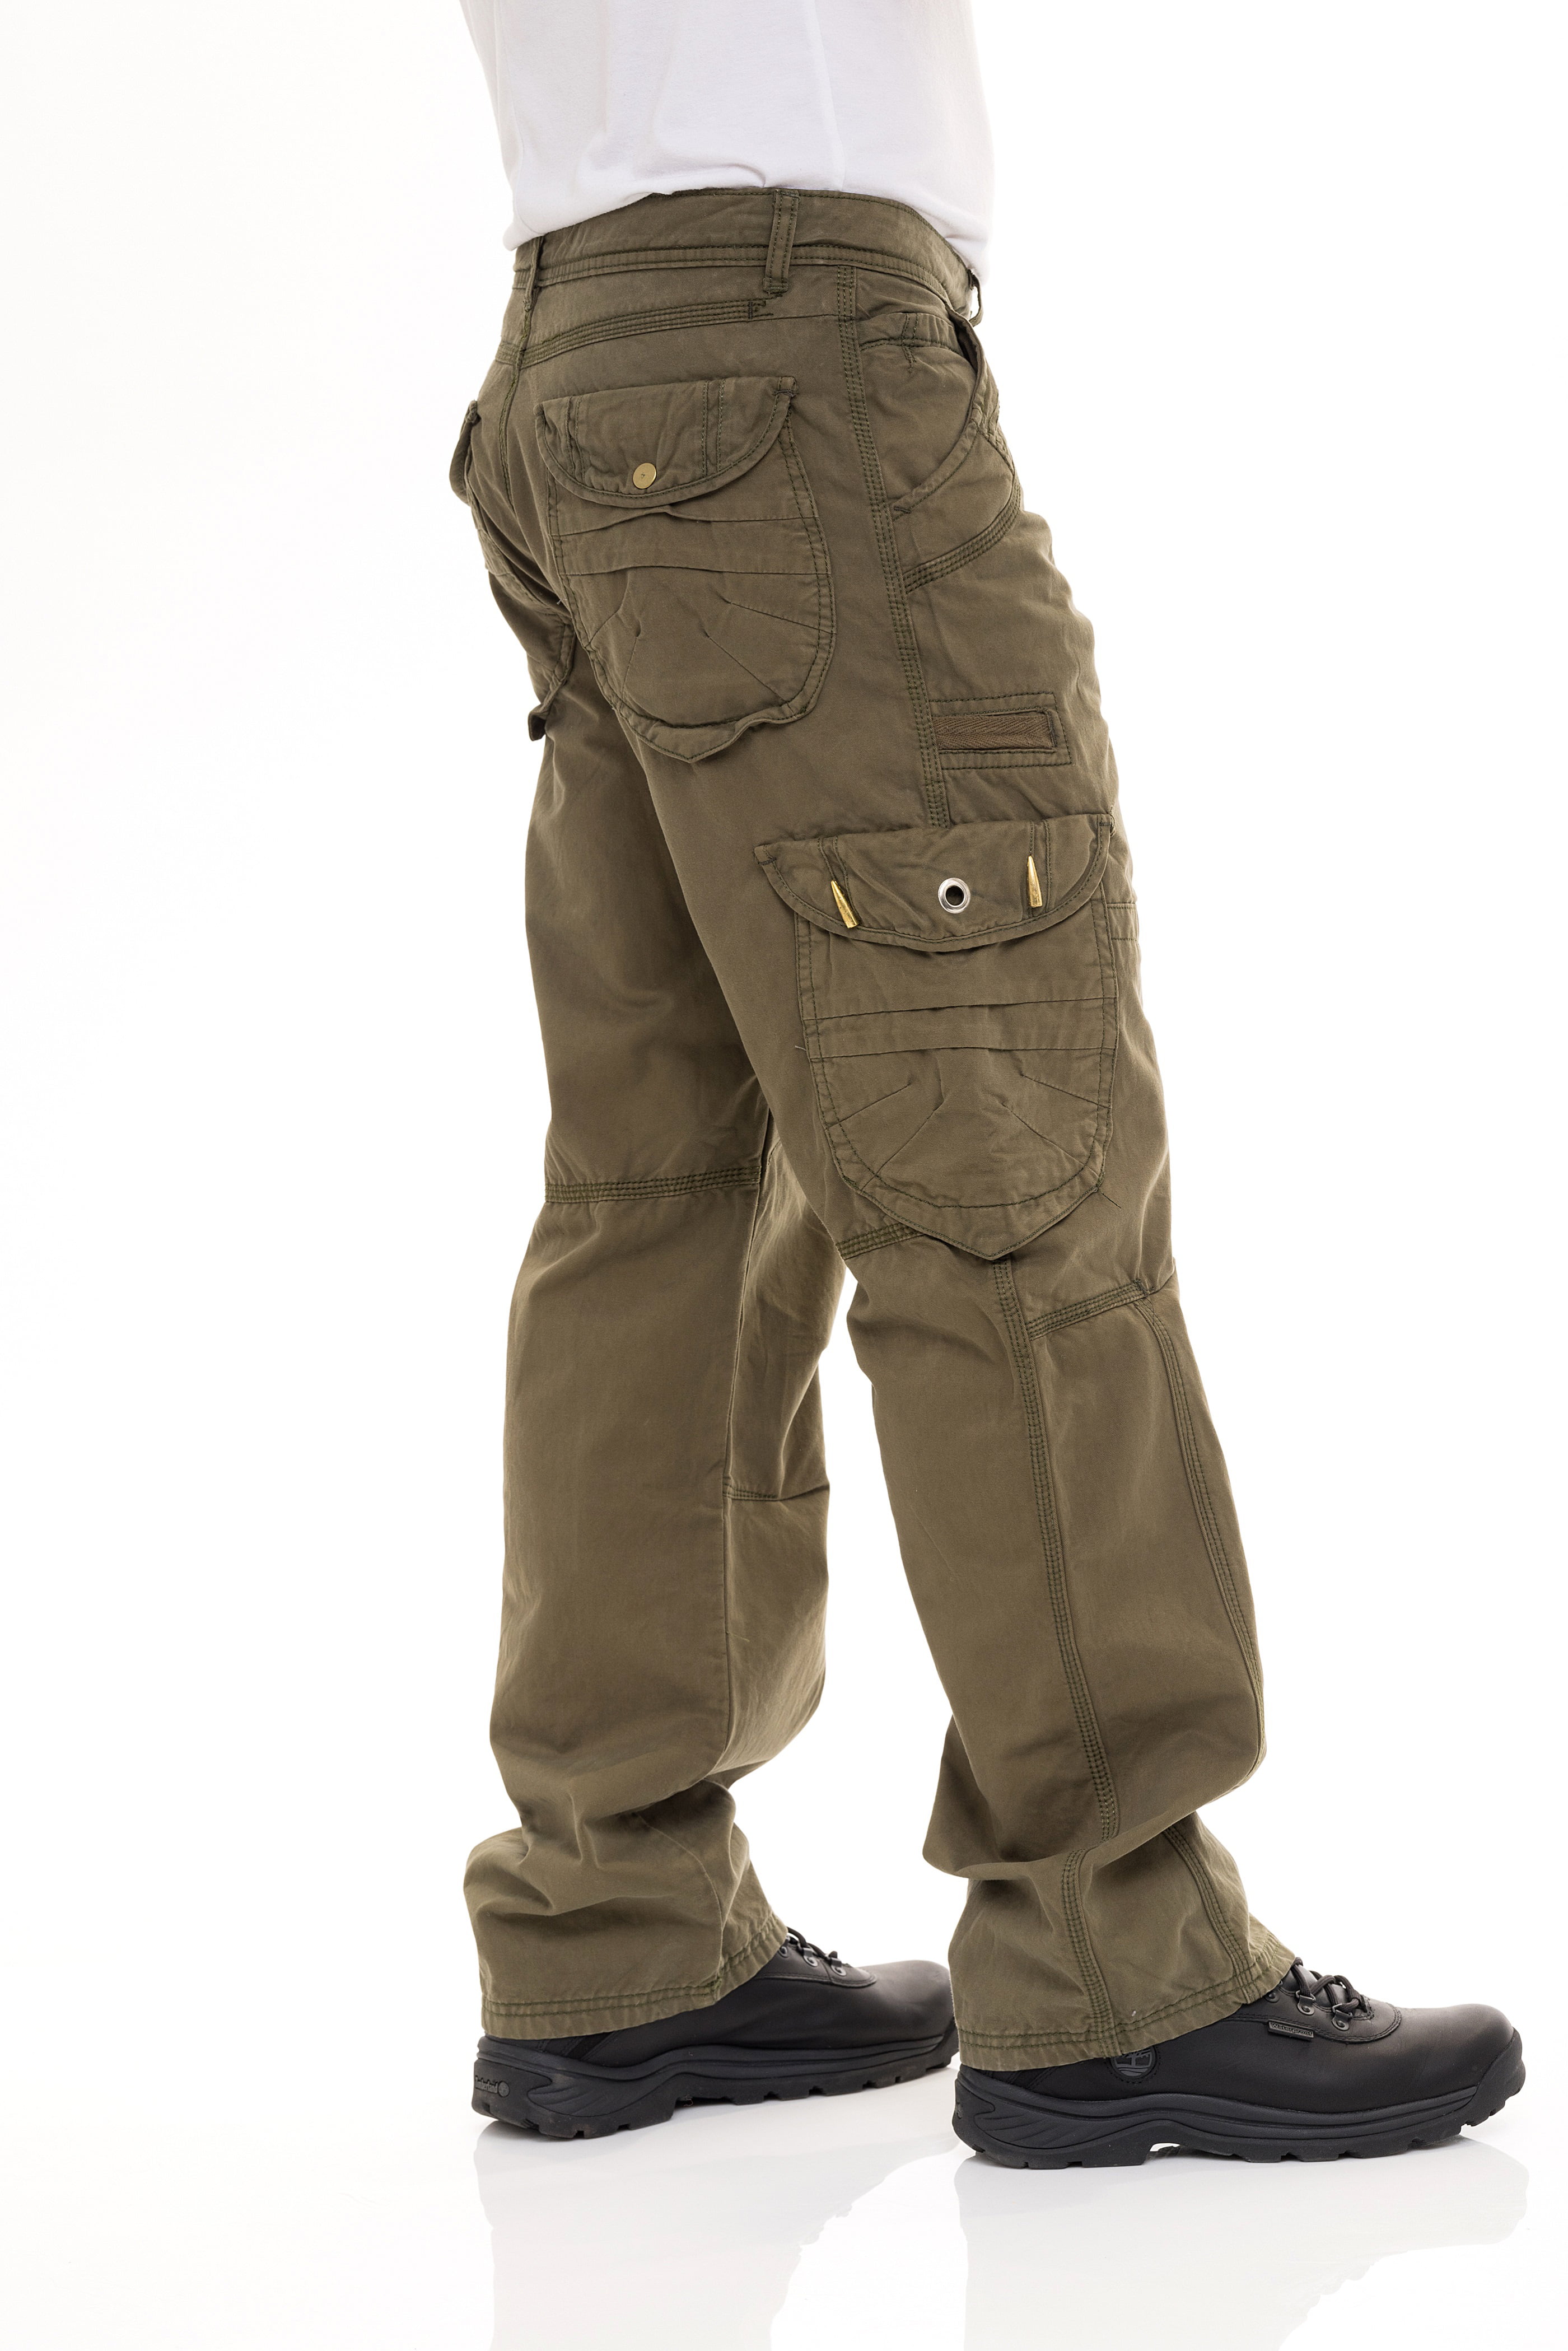 Guide Gear Cargo Pants for Men with Pockets Cotton Tactical Work Hiking Military Pants 